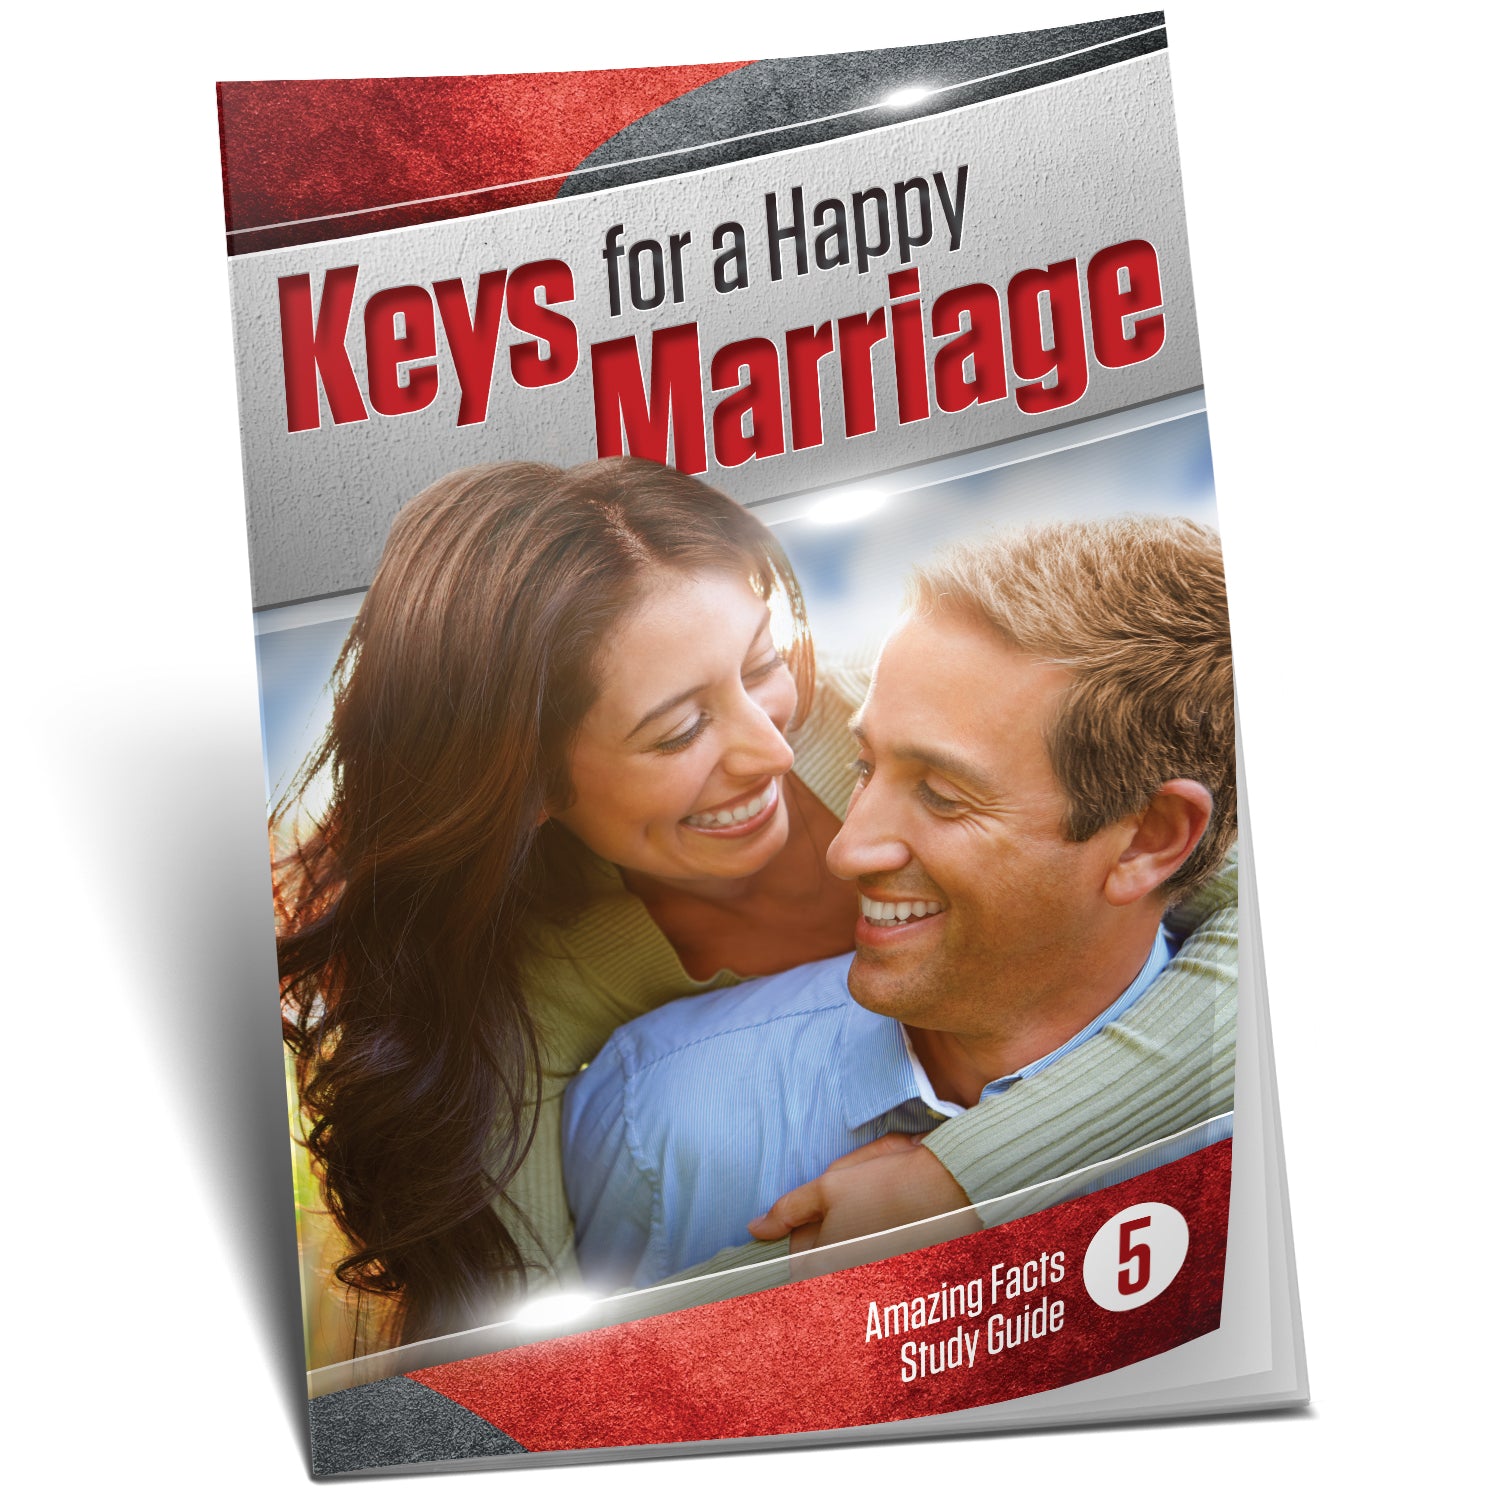 Couples Book 101 Secrets to a Happy Marriage Wedding Gift - Keys